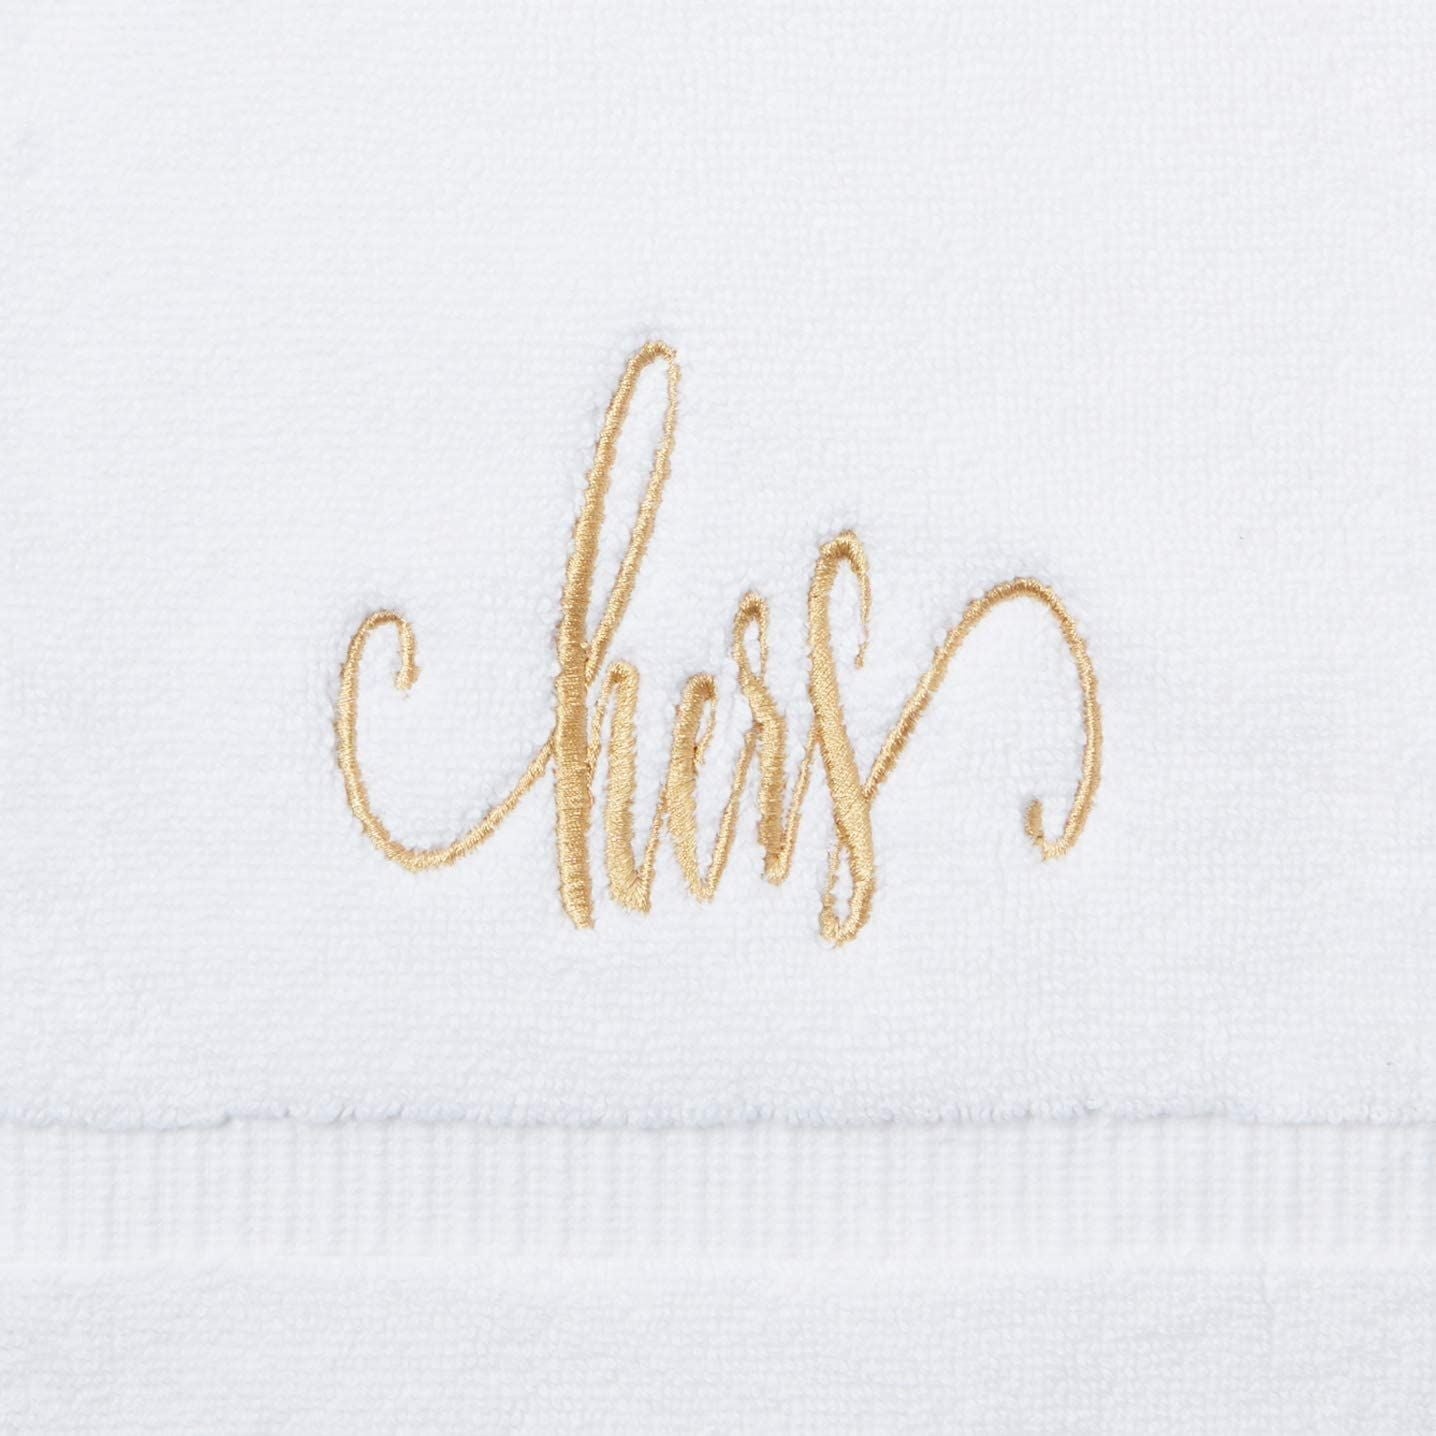 His/hers Embroidered Towel Hand Bath Sheet 